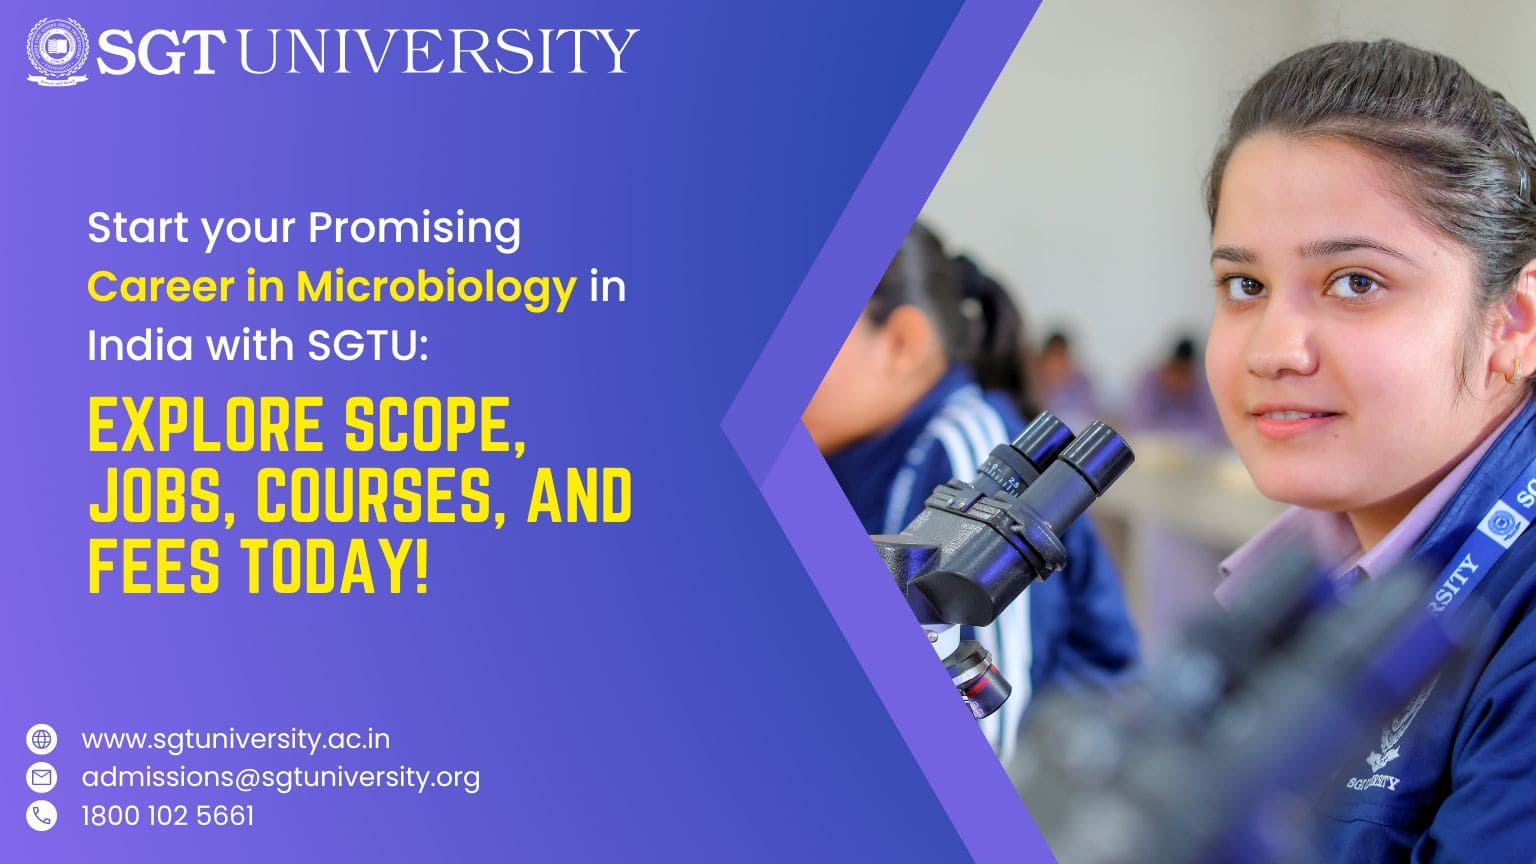 A Career in Microbiology in India: Scope, Jobs, Courses, Fees